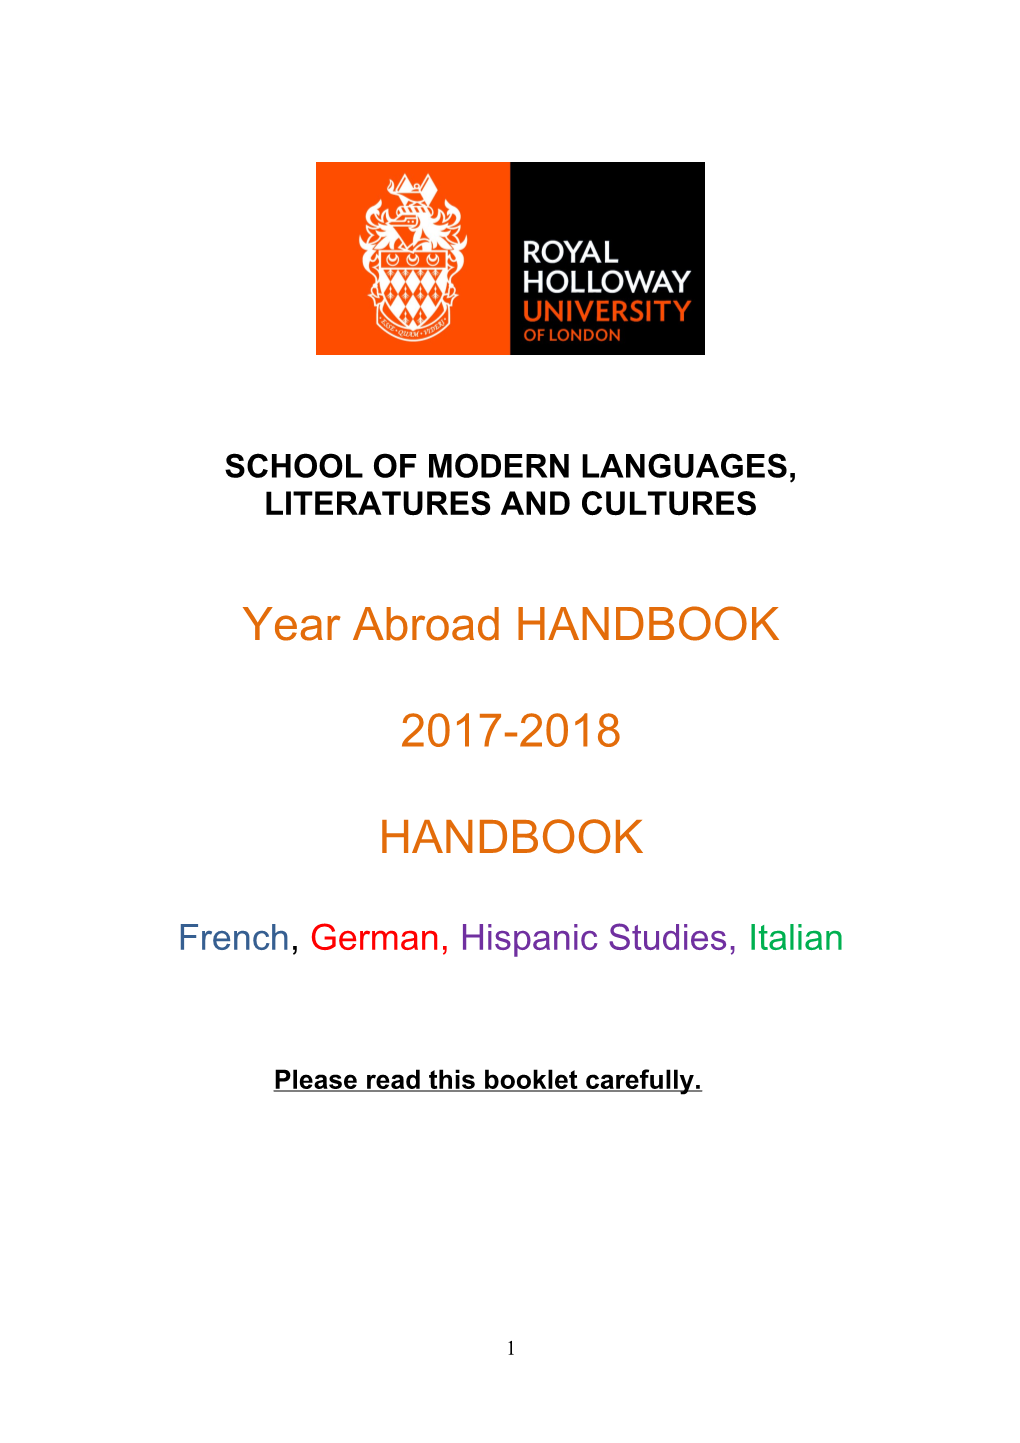 School of Modern Languages, Literatures and Cultures